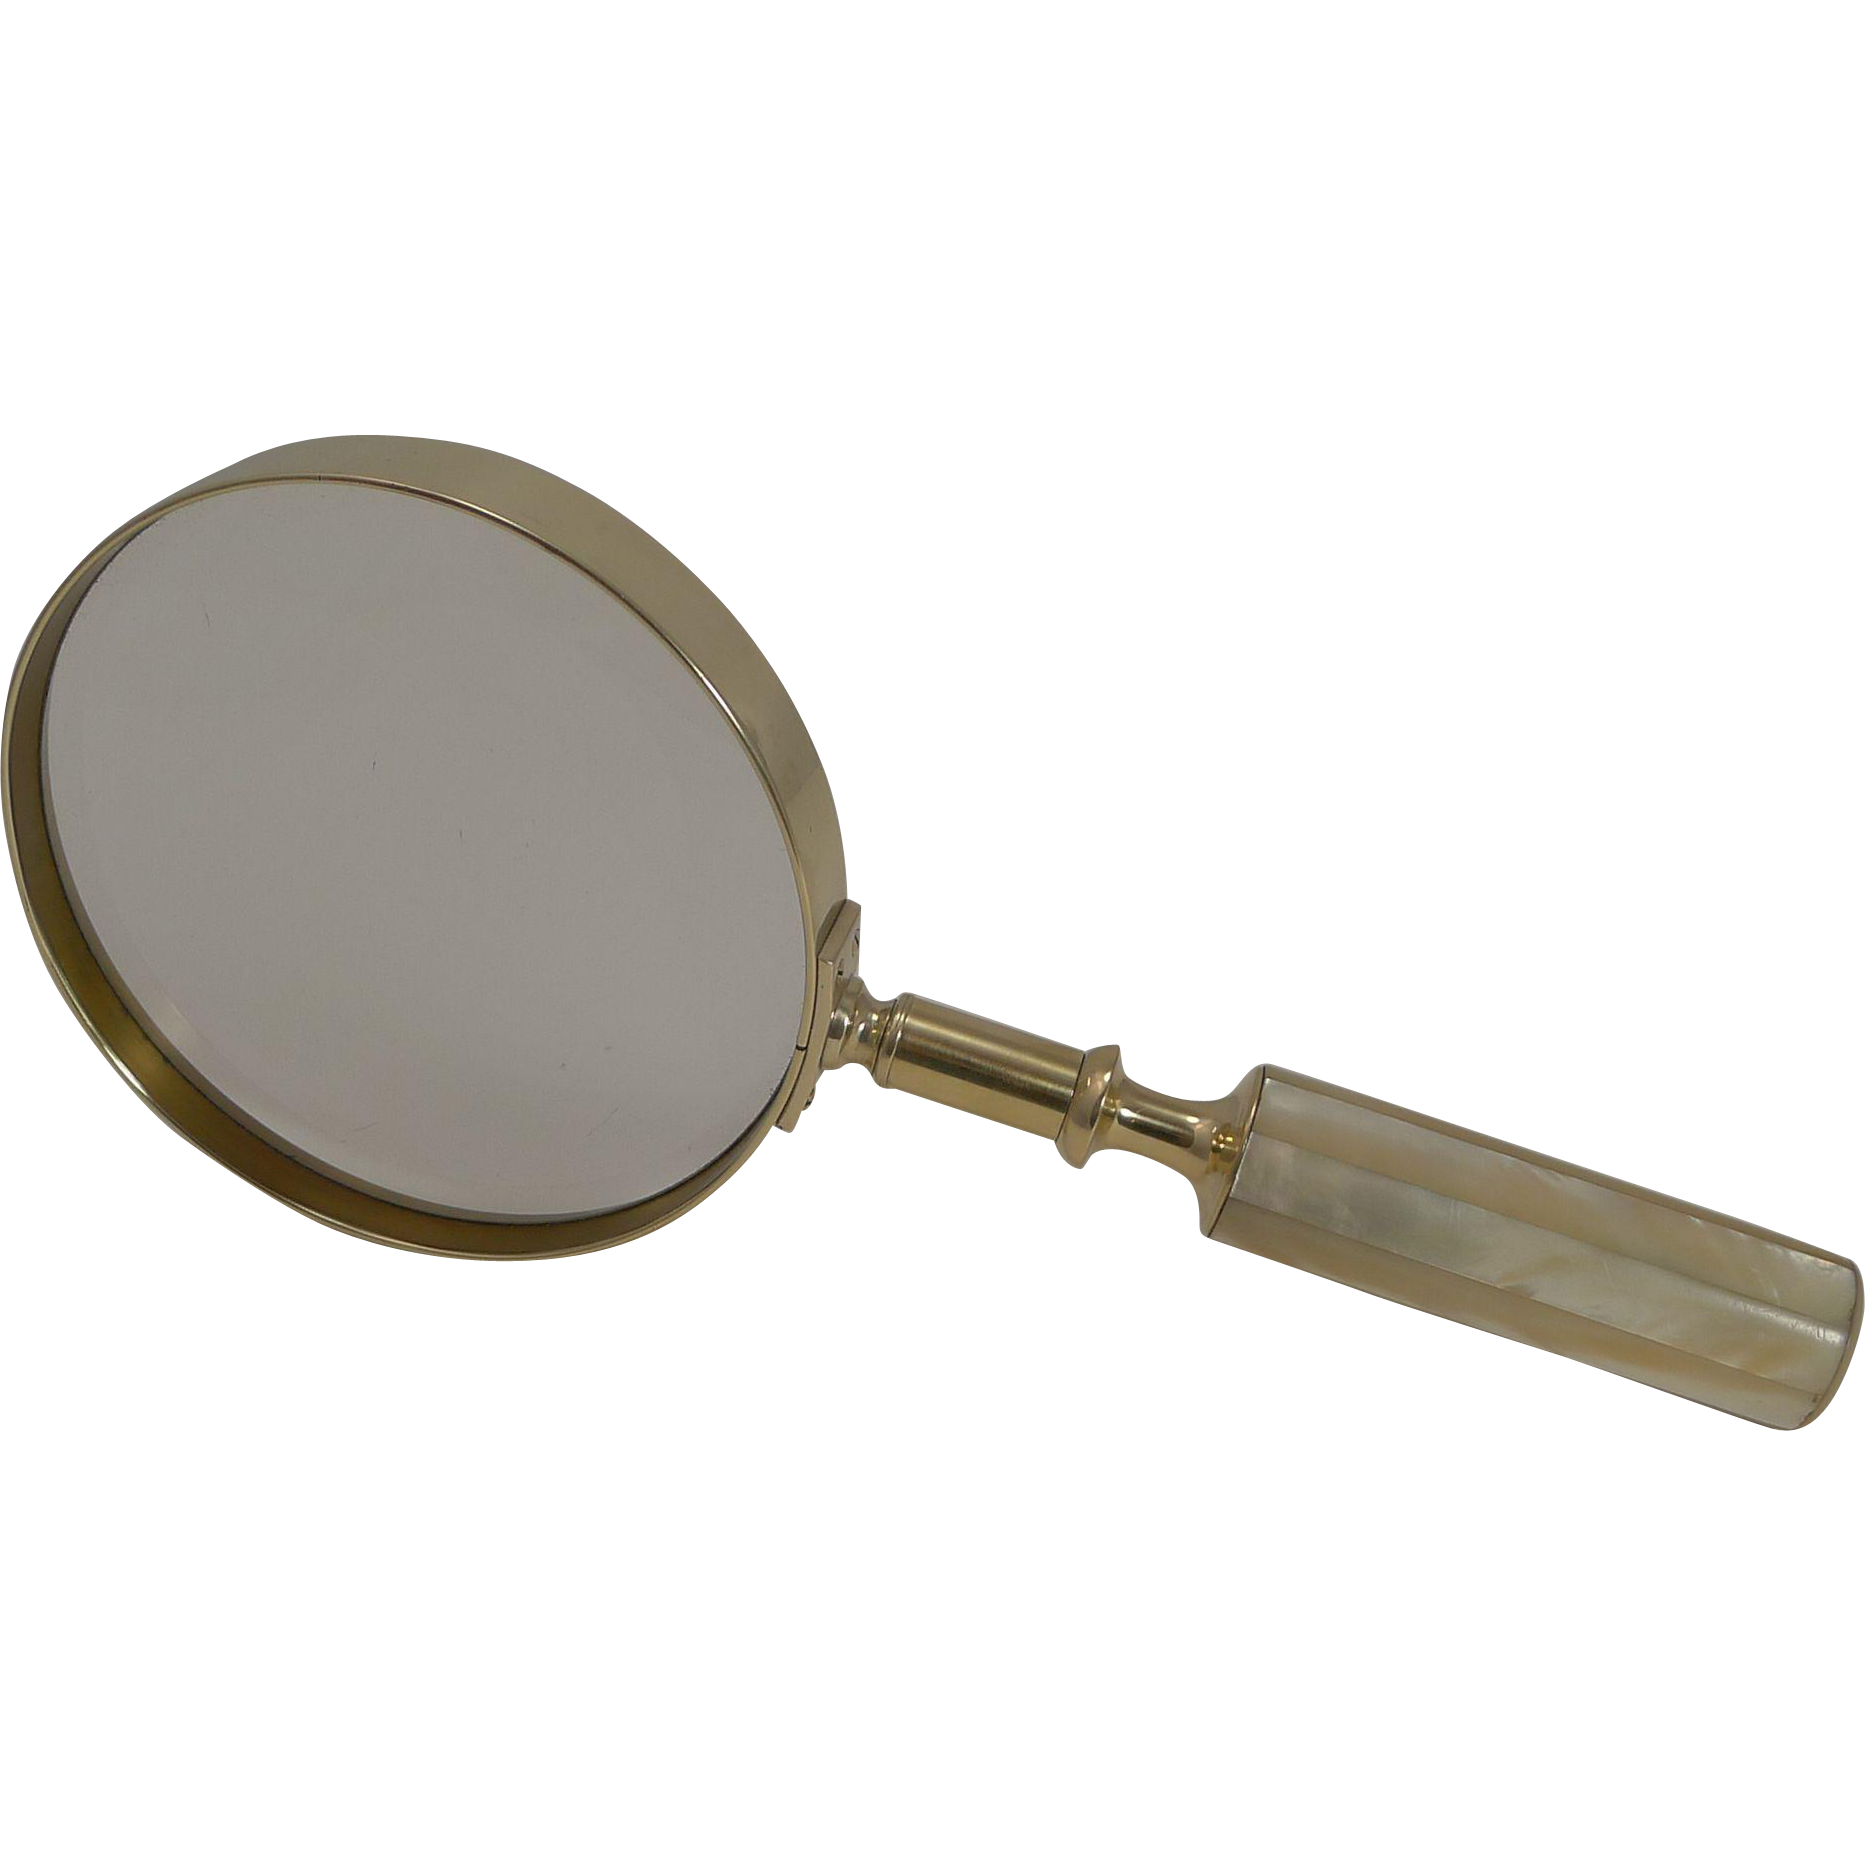 Large Magnifying Glass PNG HD Quality